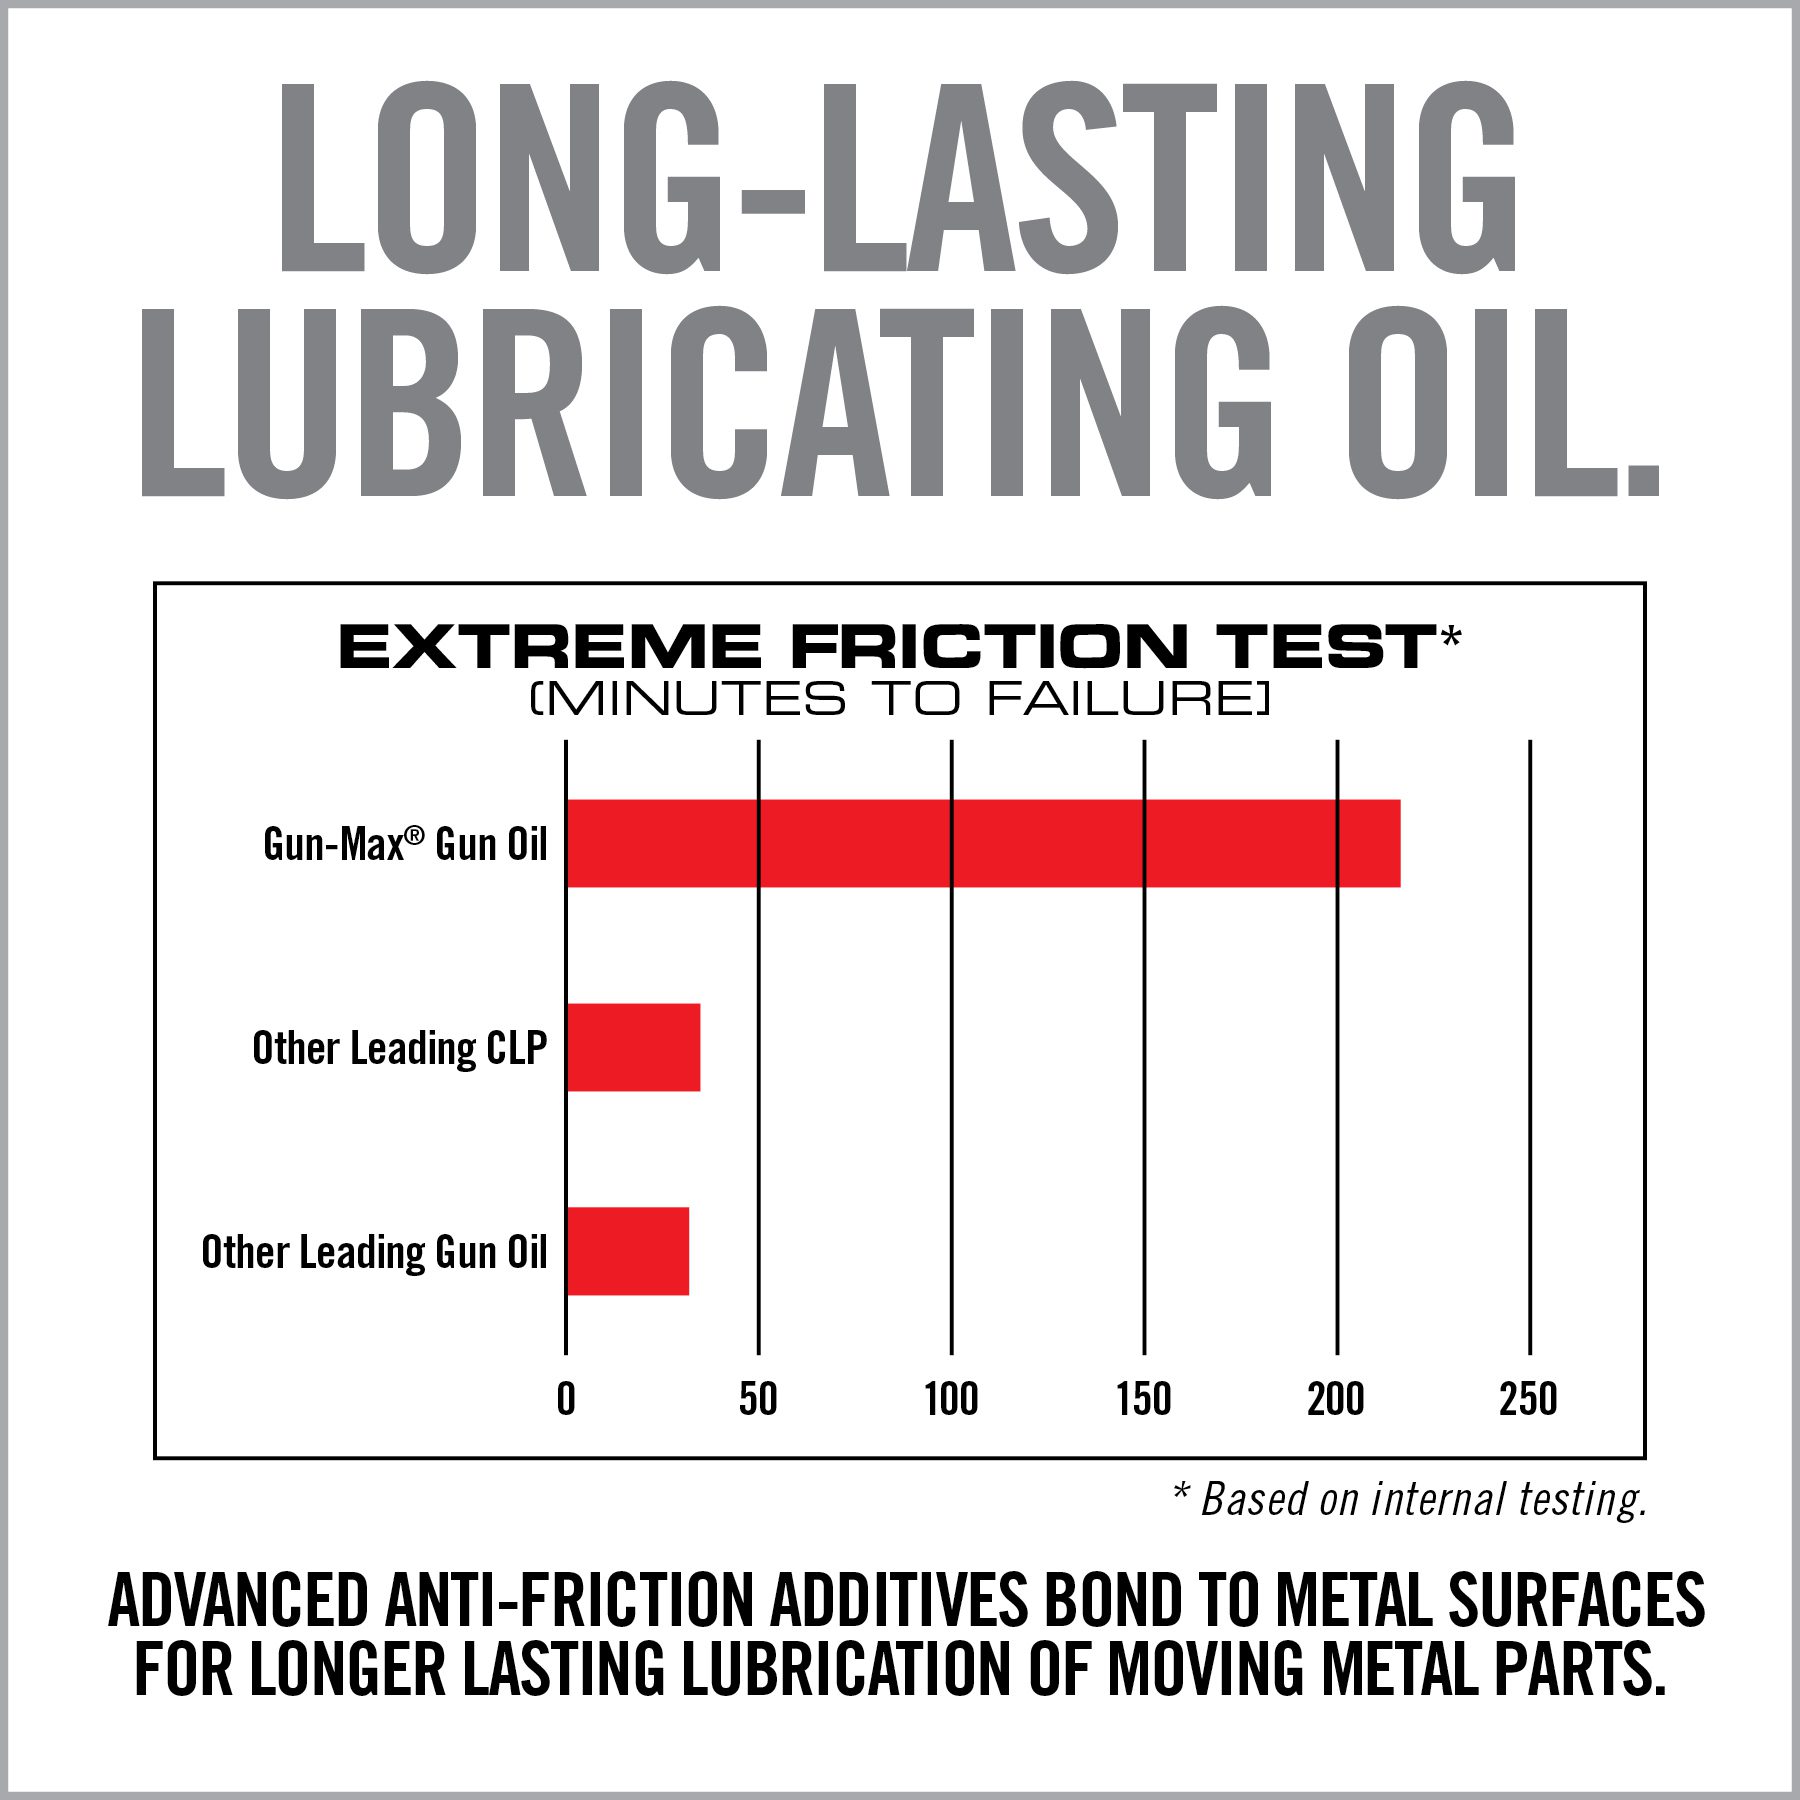 a bar chart showing the percentage of long - last lubricating oil